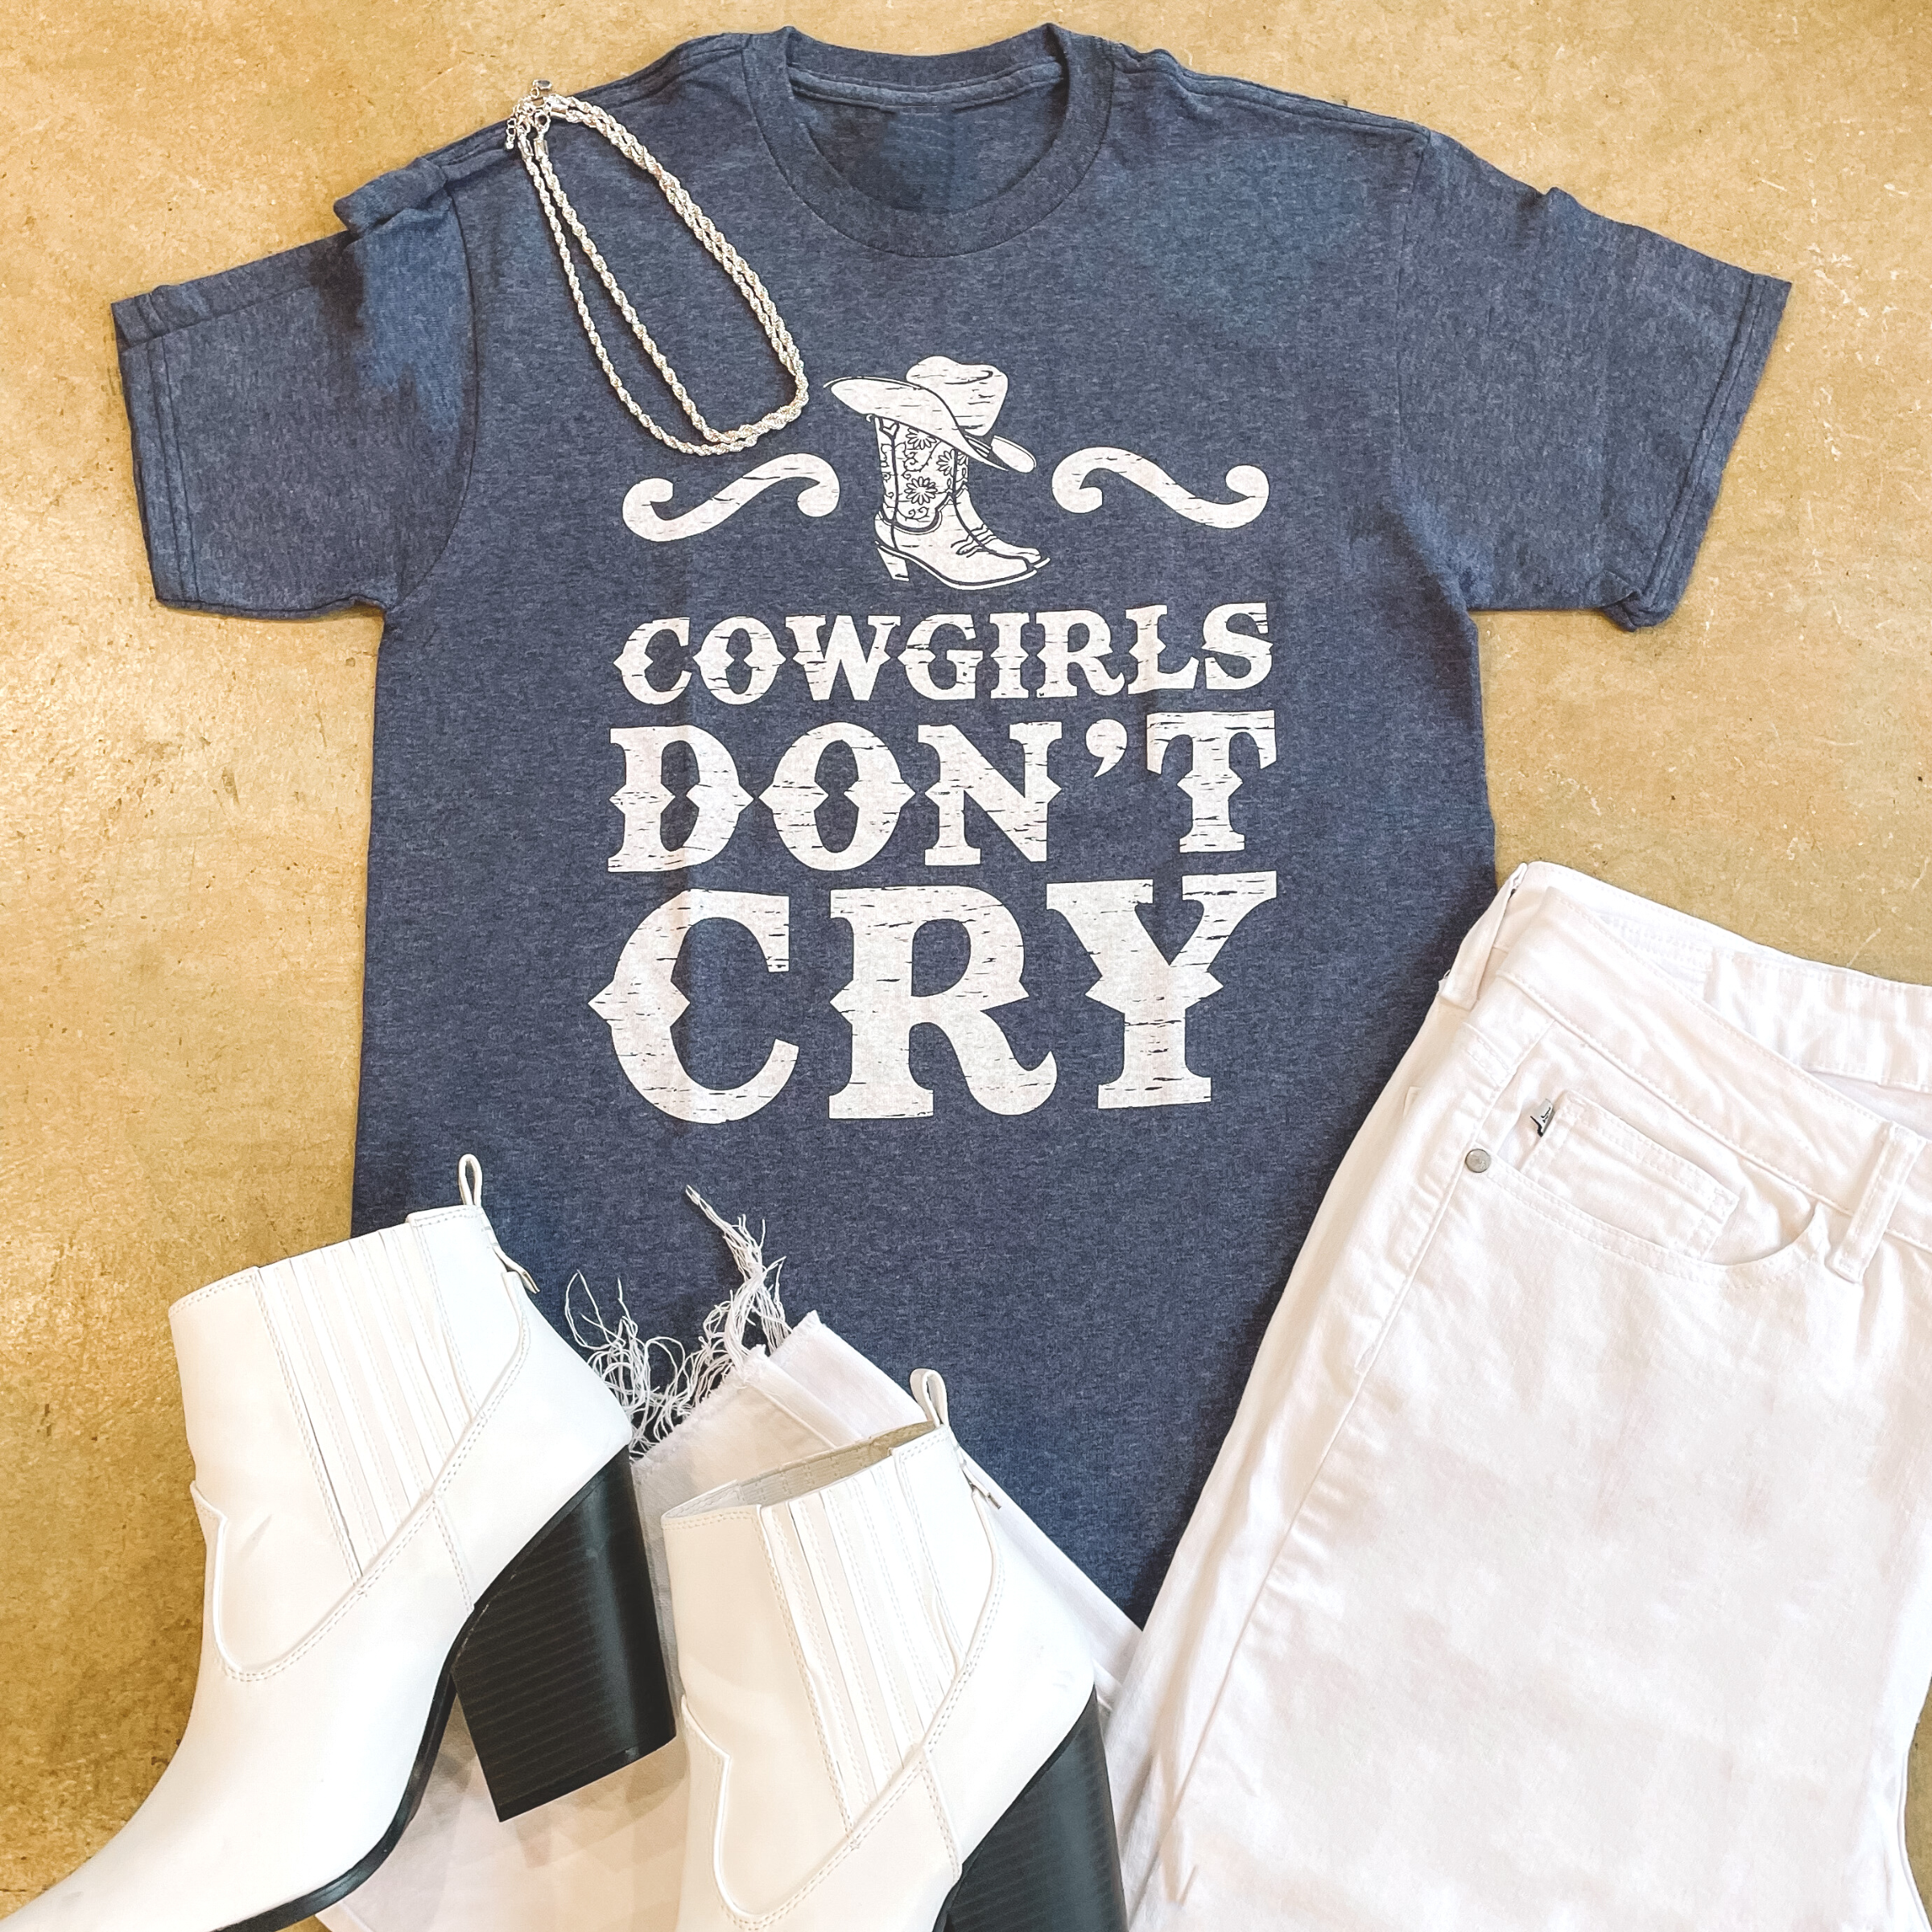 Denim color shirt with text saying "Cowgirls Don't Cry" and a boot decal on the top. Paired with the shirt in the top left is a double strand silver necklace and in the bottom left white booties along with white croped pants in the bottom right. Background is tan. 